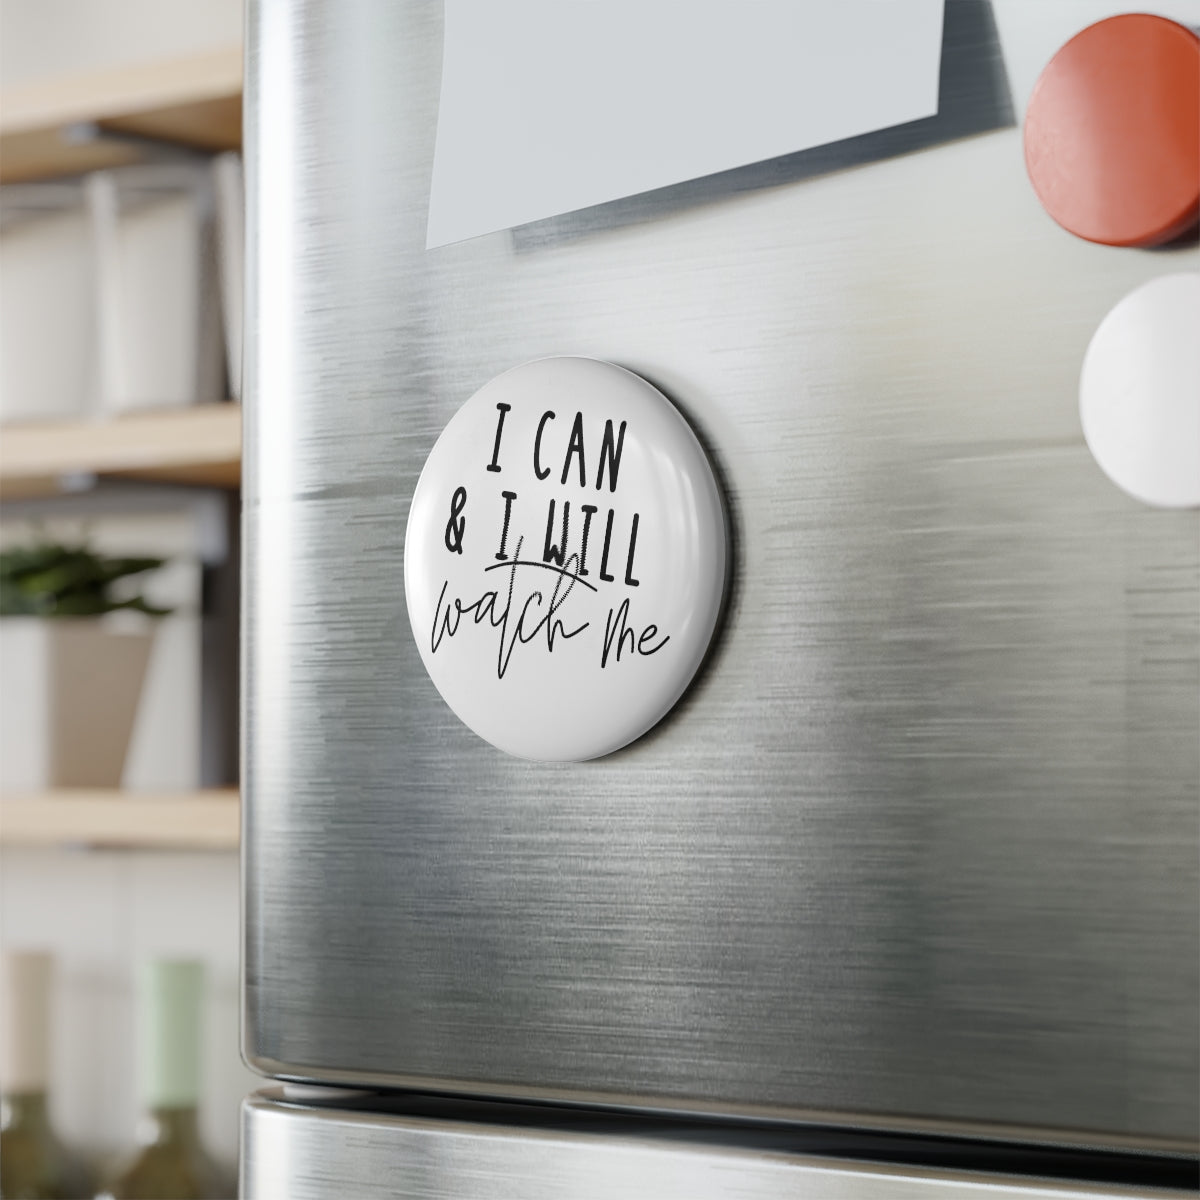 I can and I will Button Magnet, Round (1 & 10 pcs)